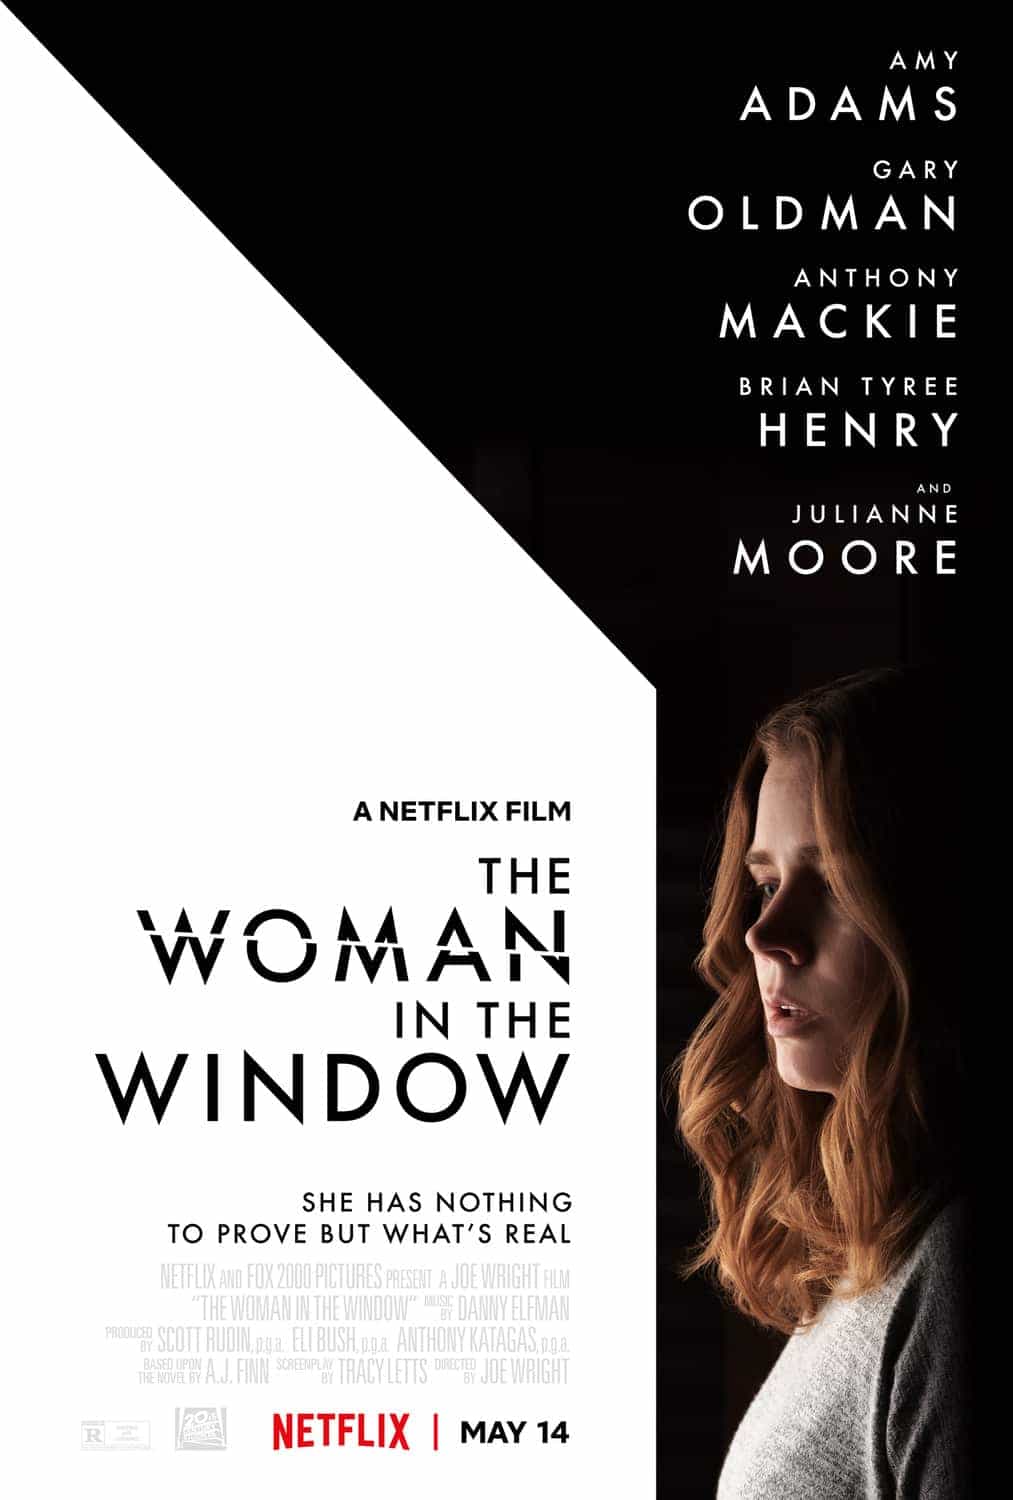 New Movie Preview UK 14th May 2021 - The woman in the Window gets a Netflix release ahead of big UK cinema reopening 